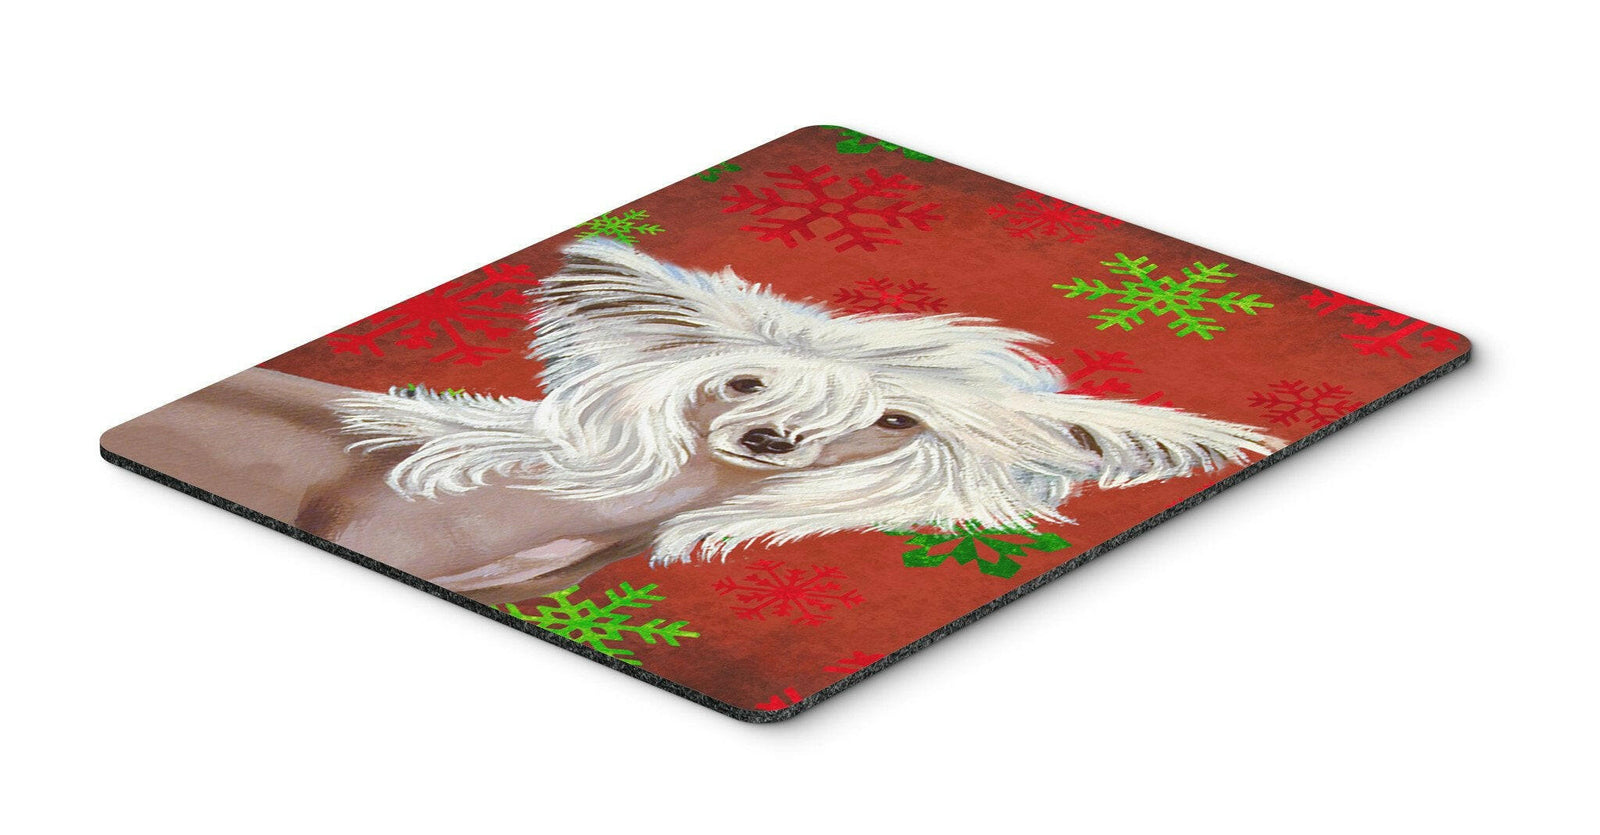 Chinese Crested Red and Green Snowflakes Christmas Mouse Pad, Hot Pad or Trivet by Caroline's Treasures